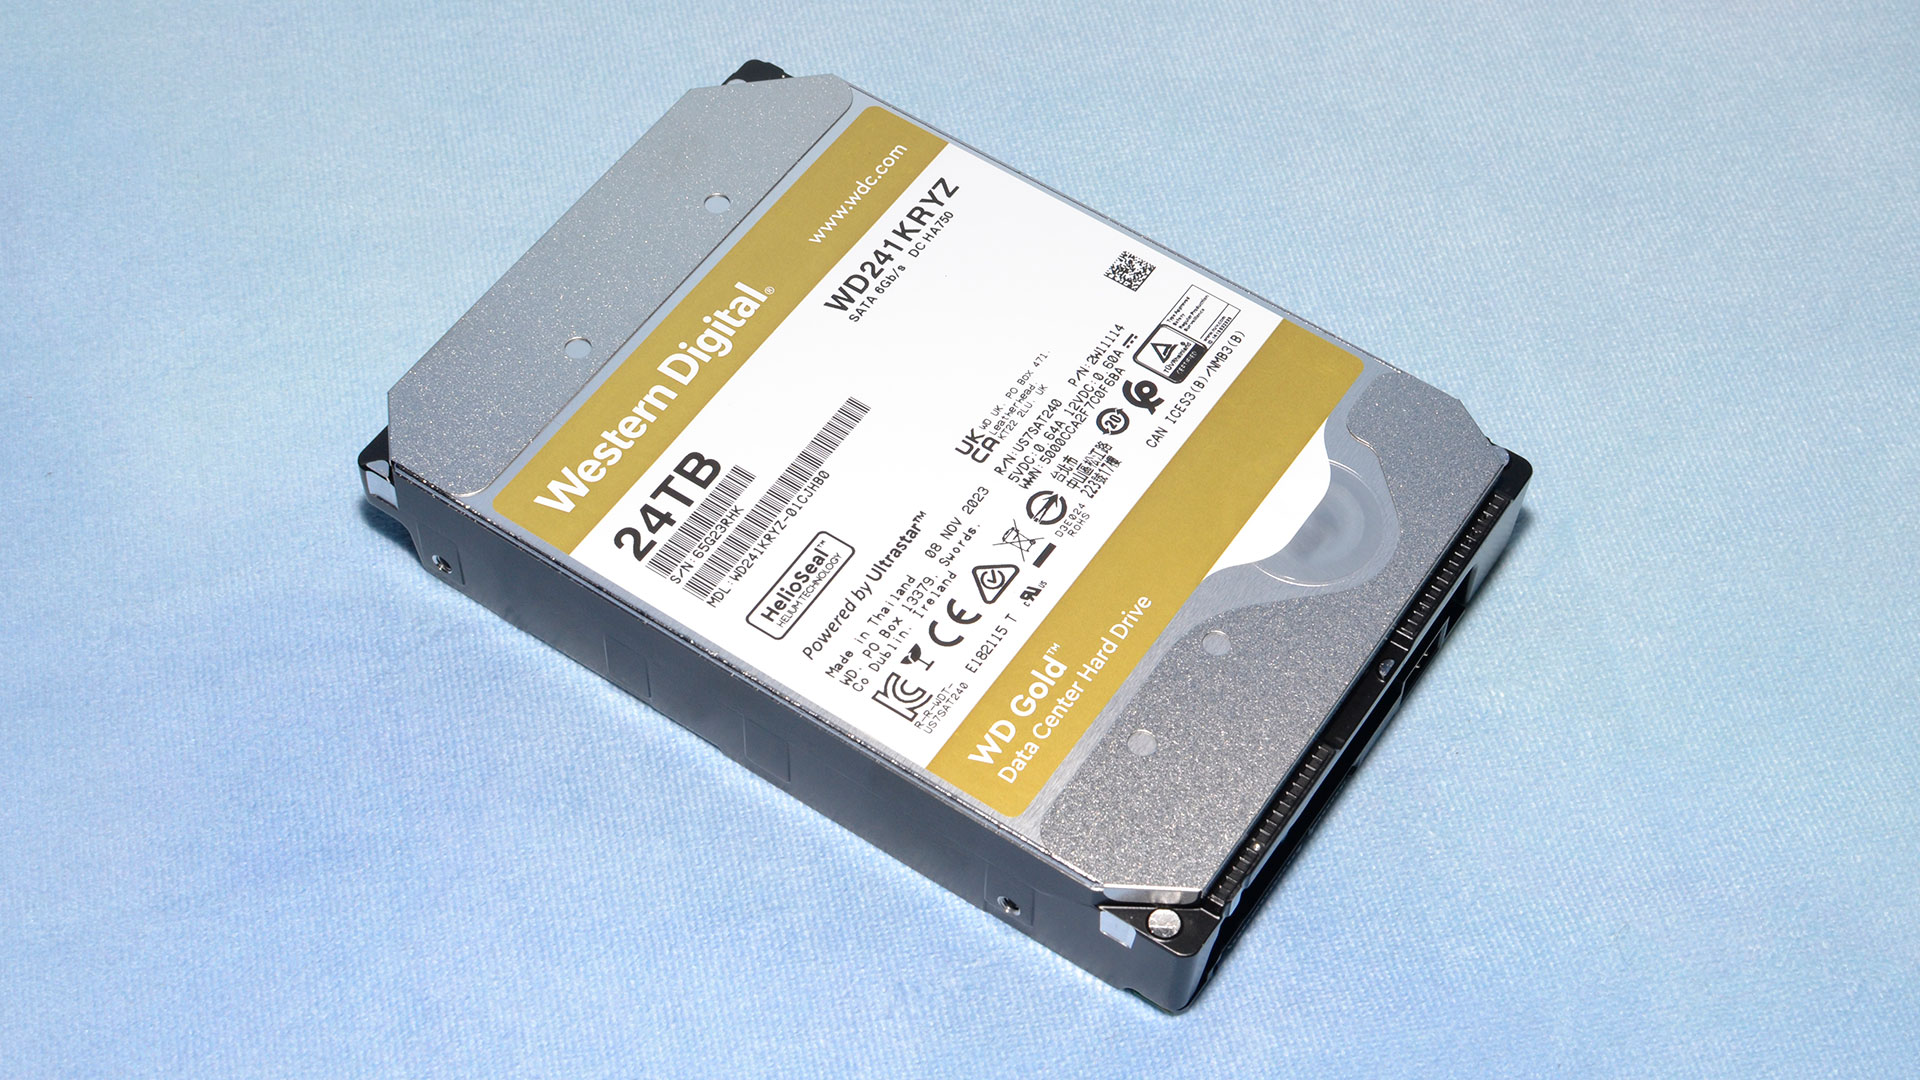 wd-gold-24tb-hdd-review:-the-highest-capacity-hard-drive-you-can-buy-right-now